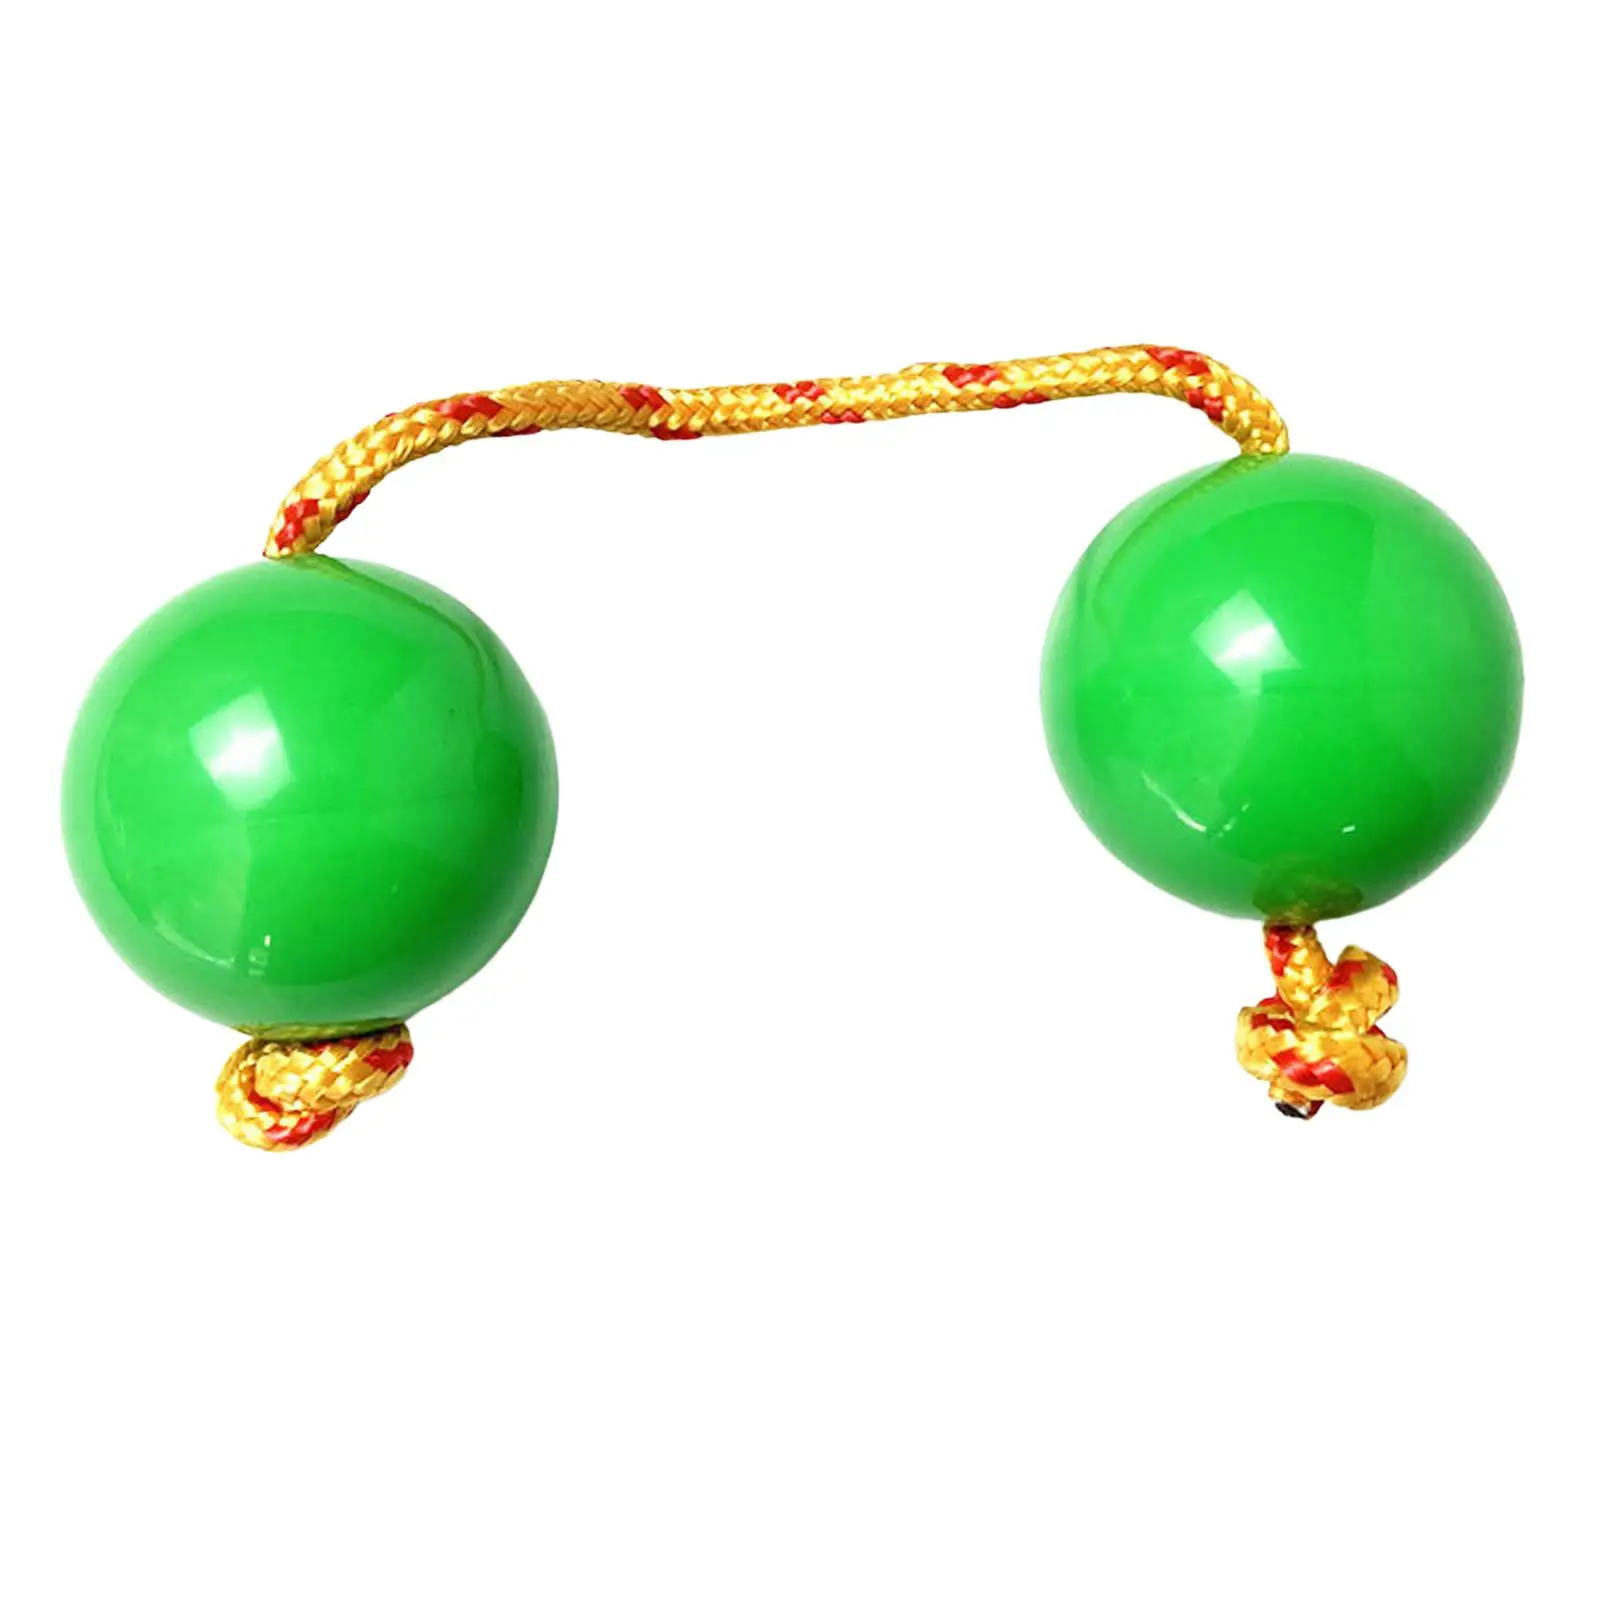 Rhythmic  Balls Percussion Instrument for Games Activities Beginners